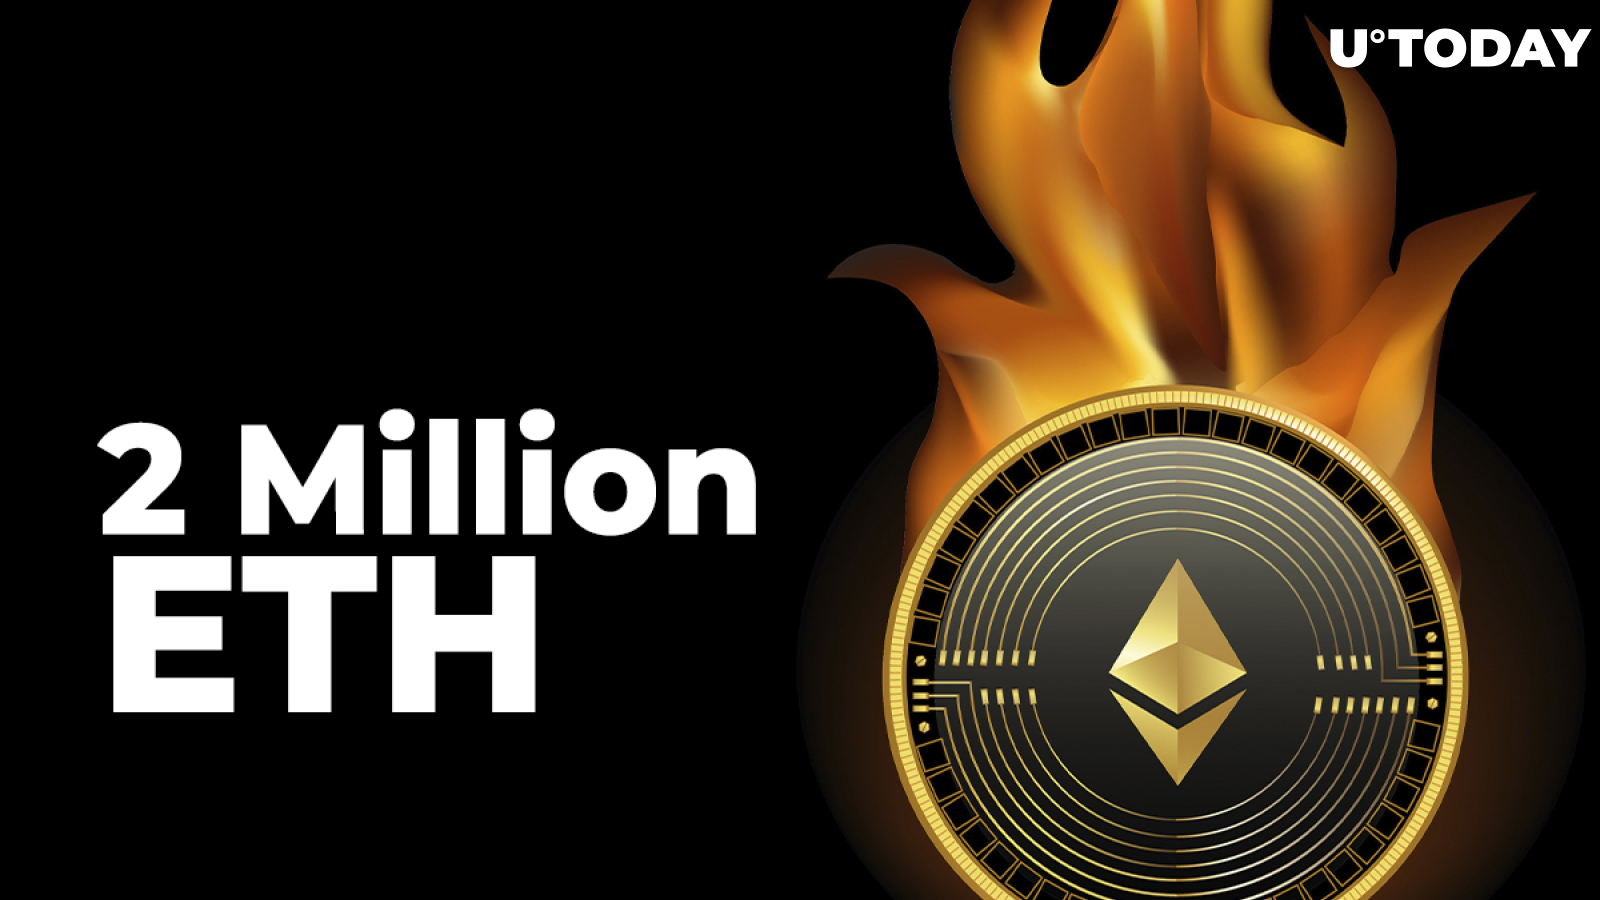 Almost Two Million ETH Might Be Burned In Next Year According to Calculation